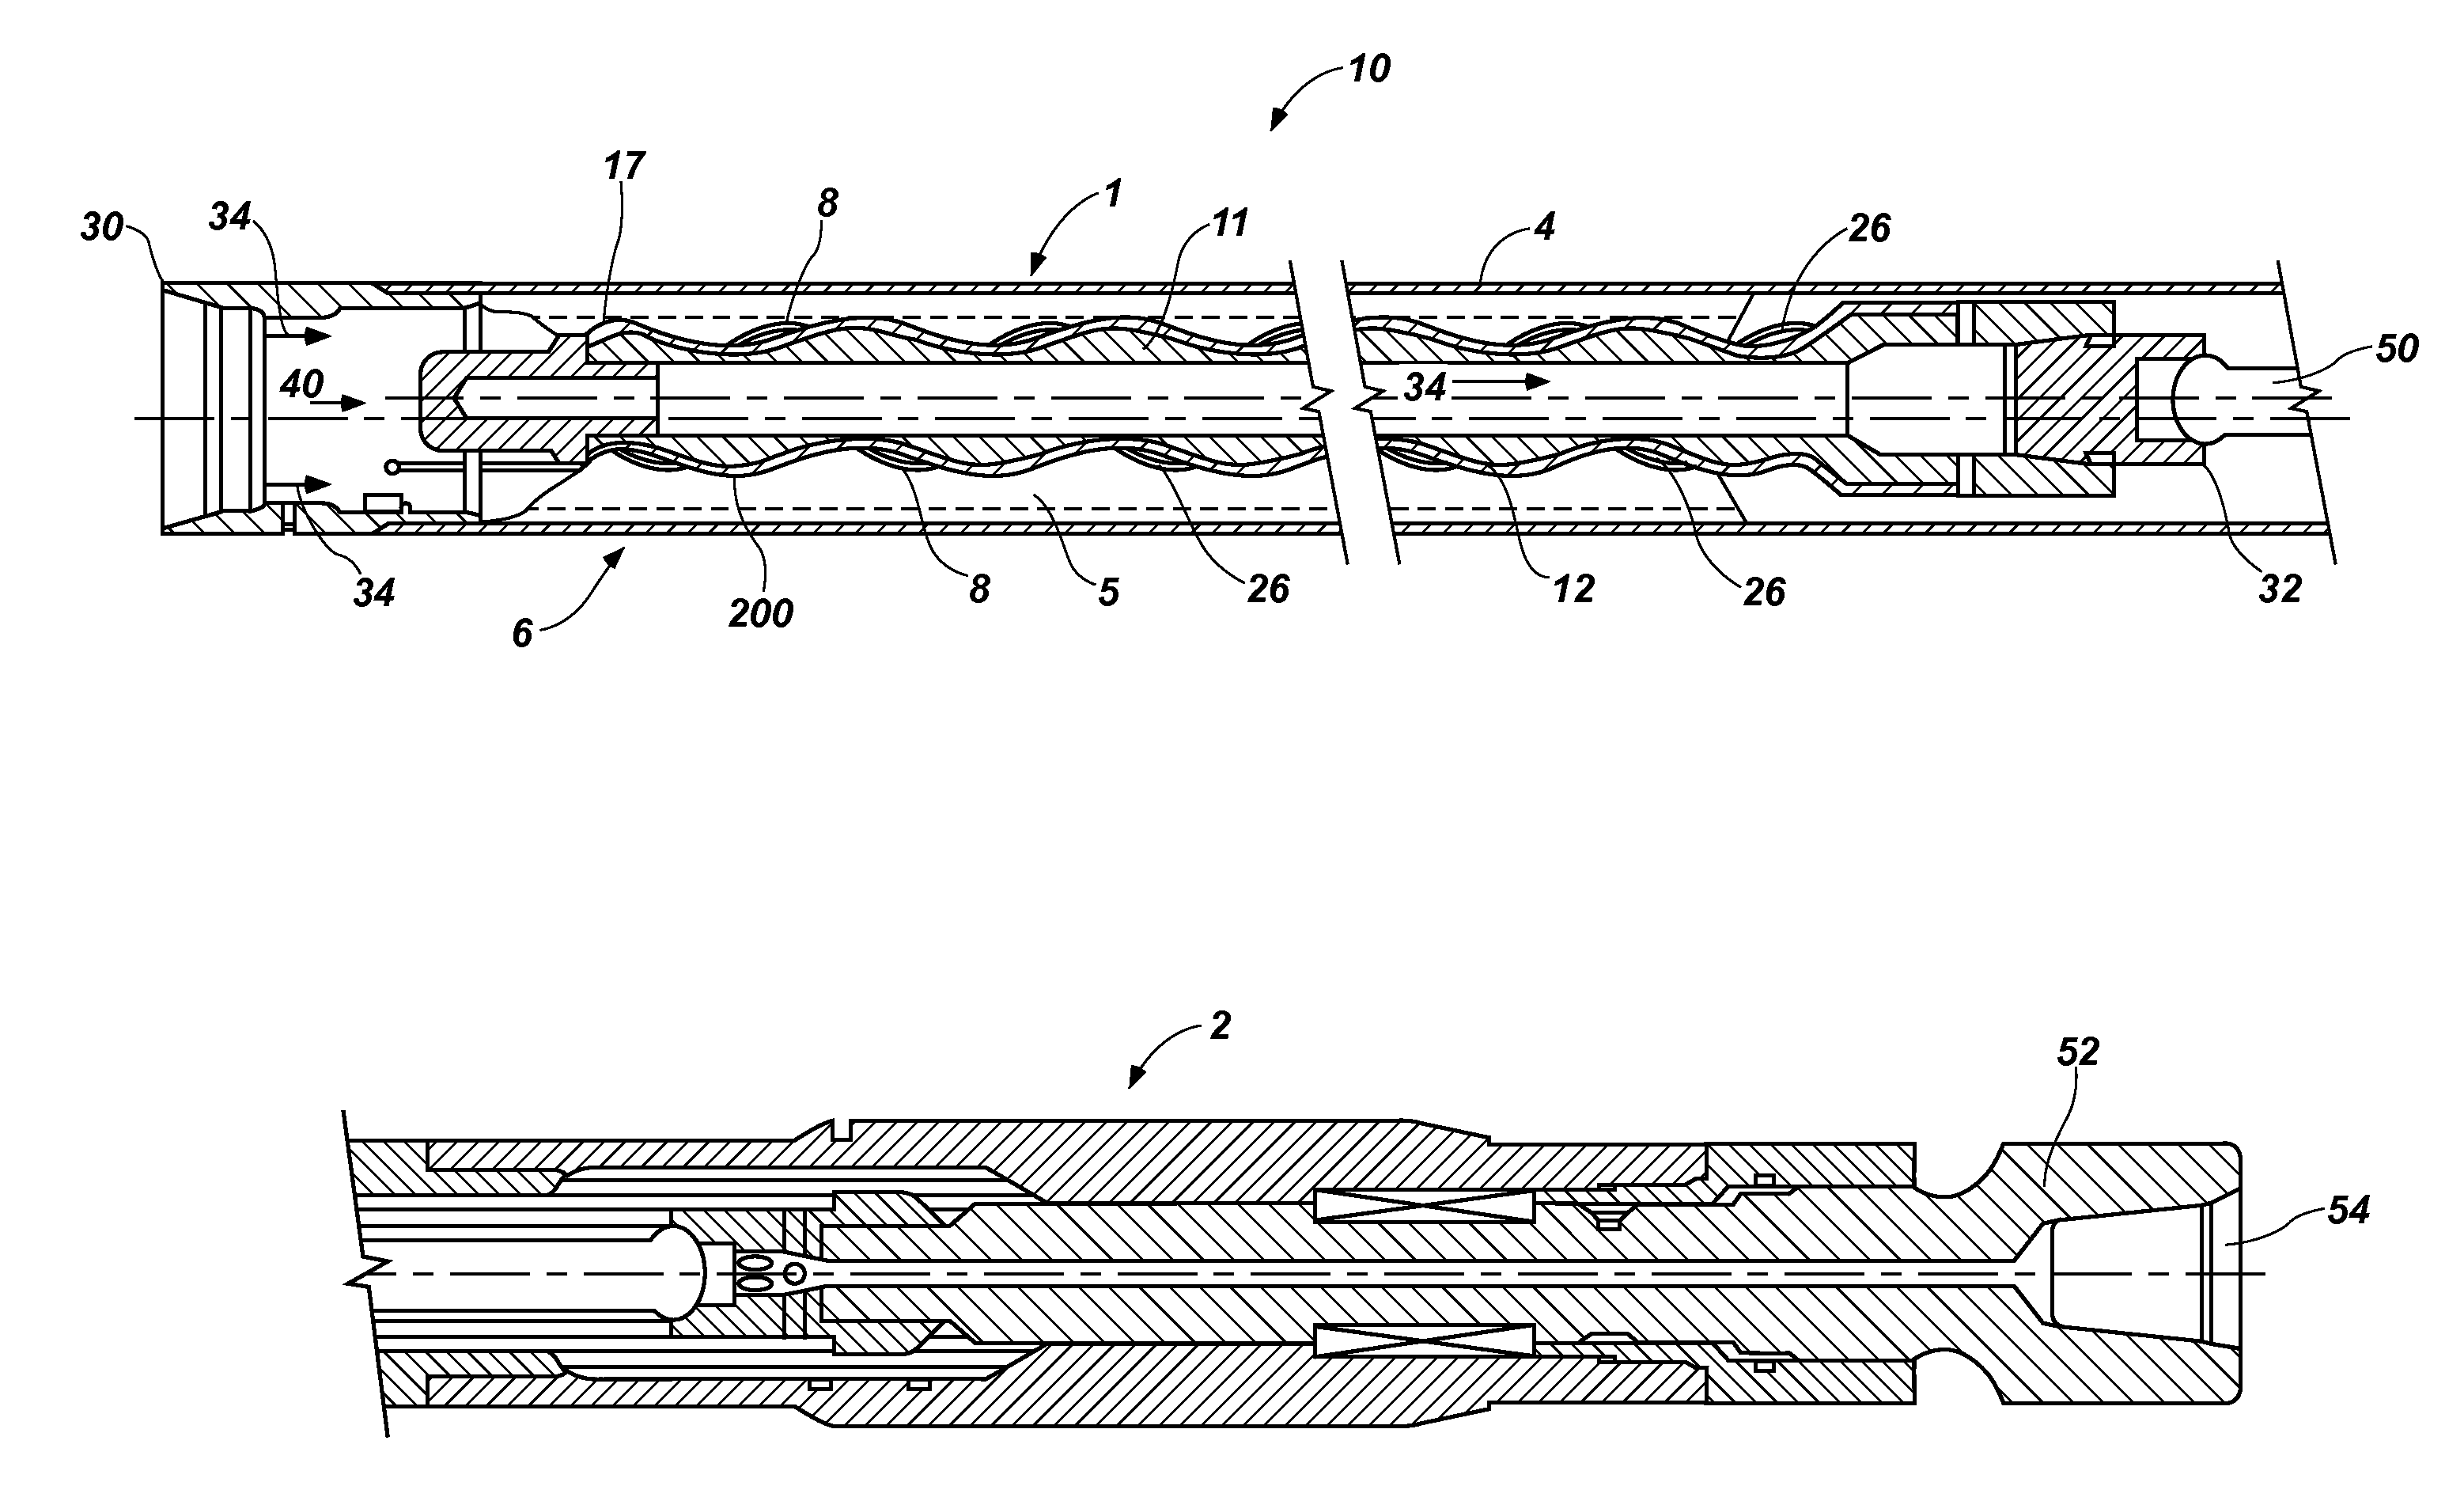 Components and motors for downhole tools and methods of applying hardfacing to surfaces thereof